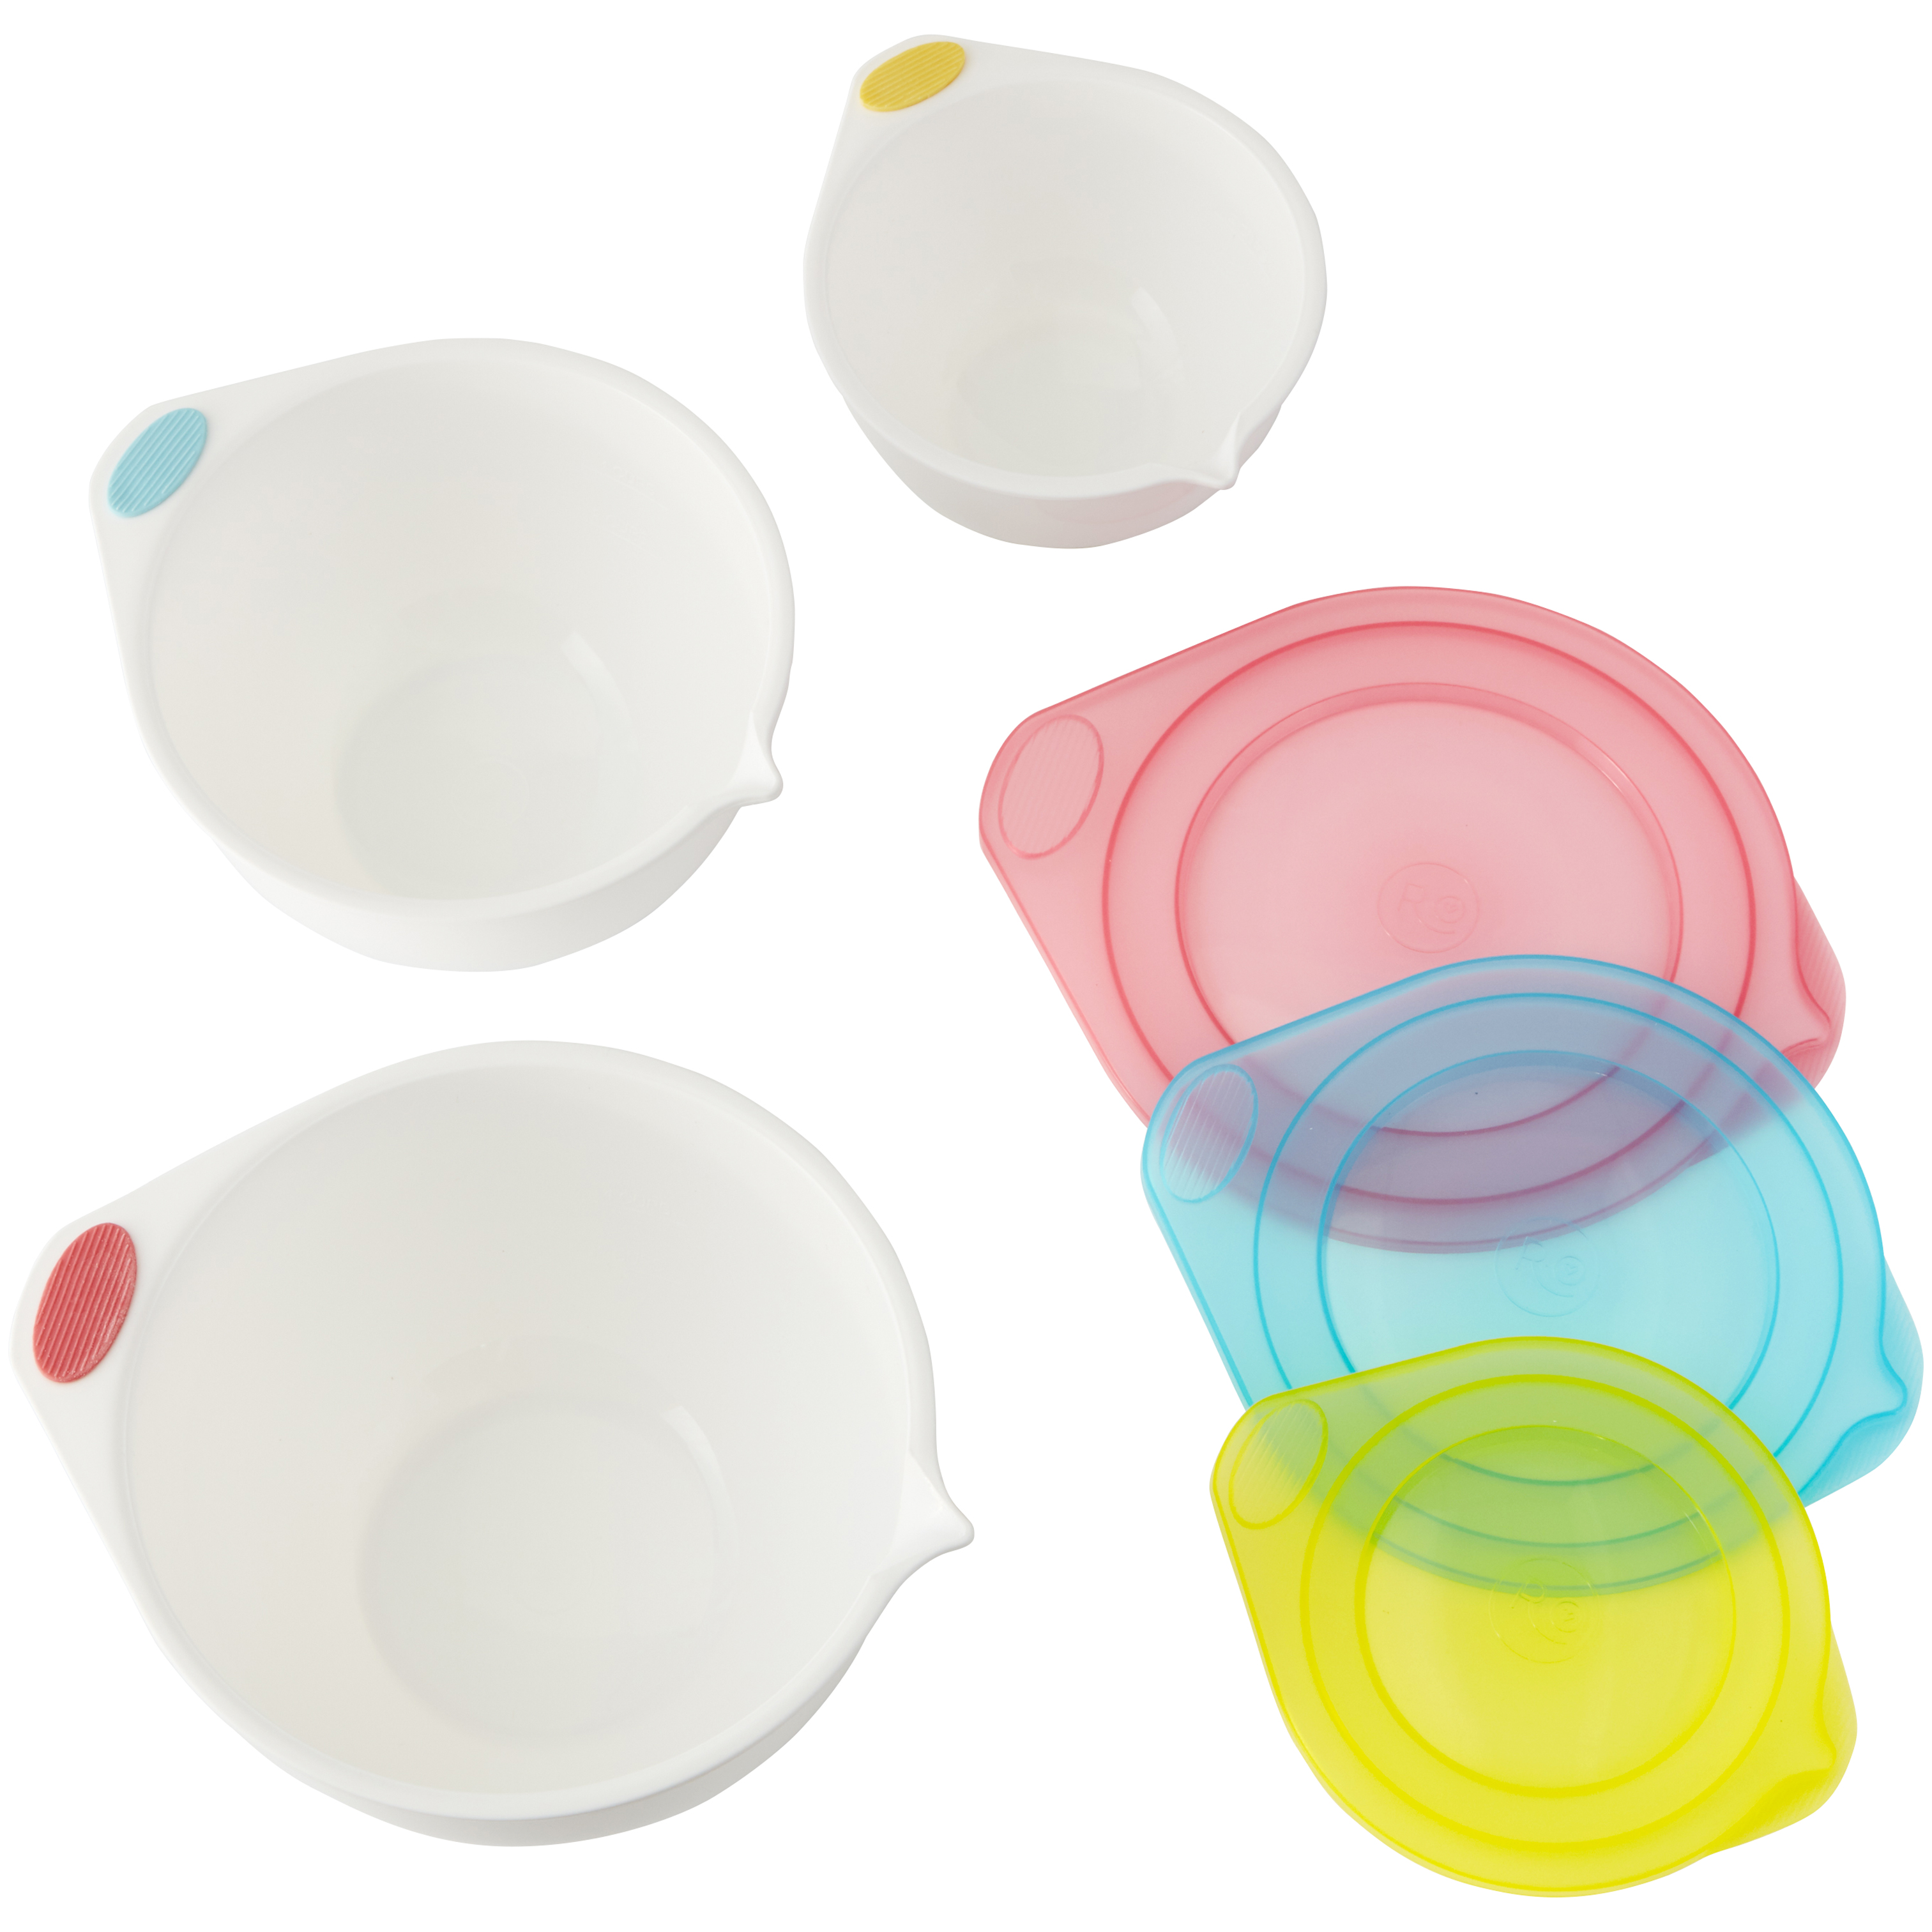 ROSANNA PANSINO by Wilton Mixing Bowl with Lids Set, 6-Piece - image 3 of 13